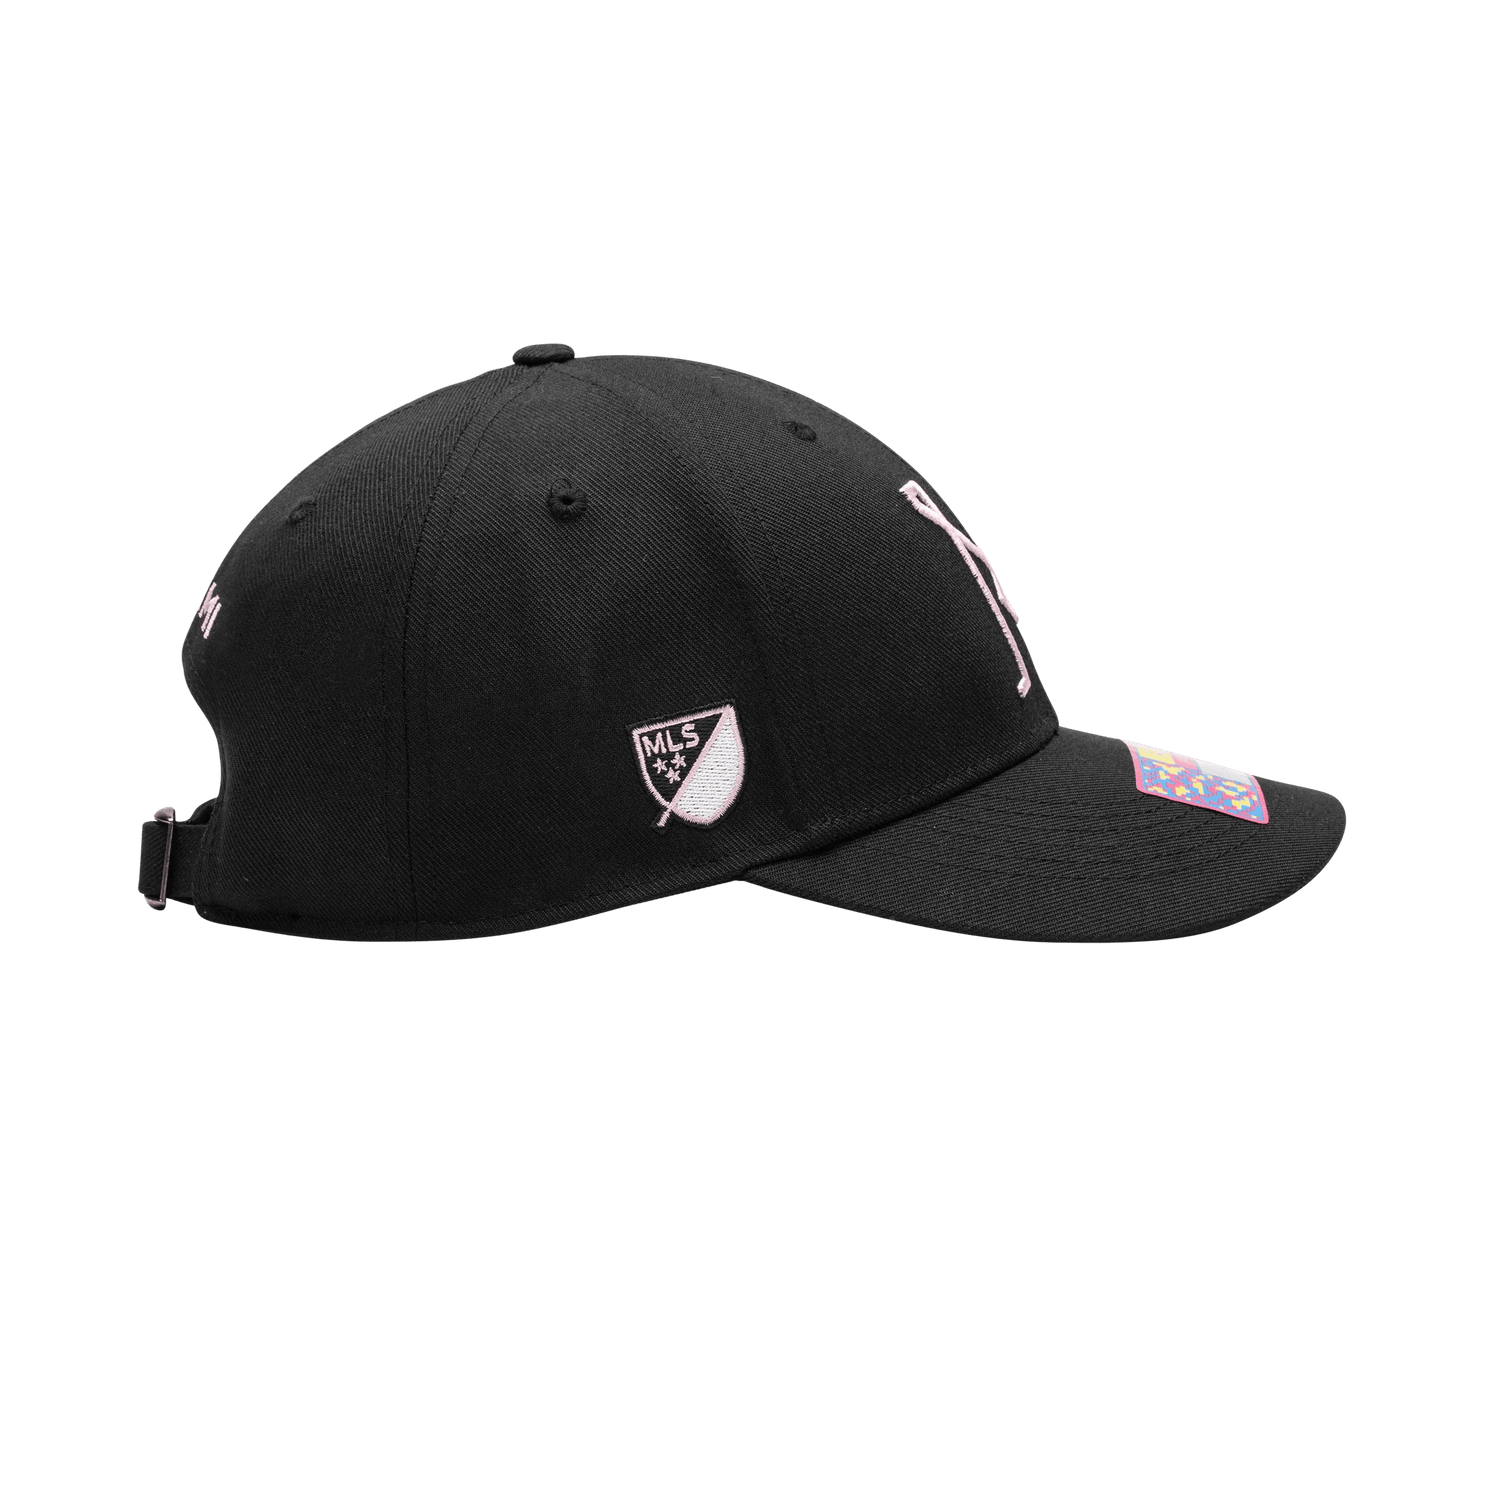 FI Collection Inter Miami Standard Adjustable Cap (Side)